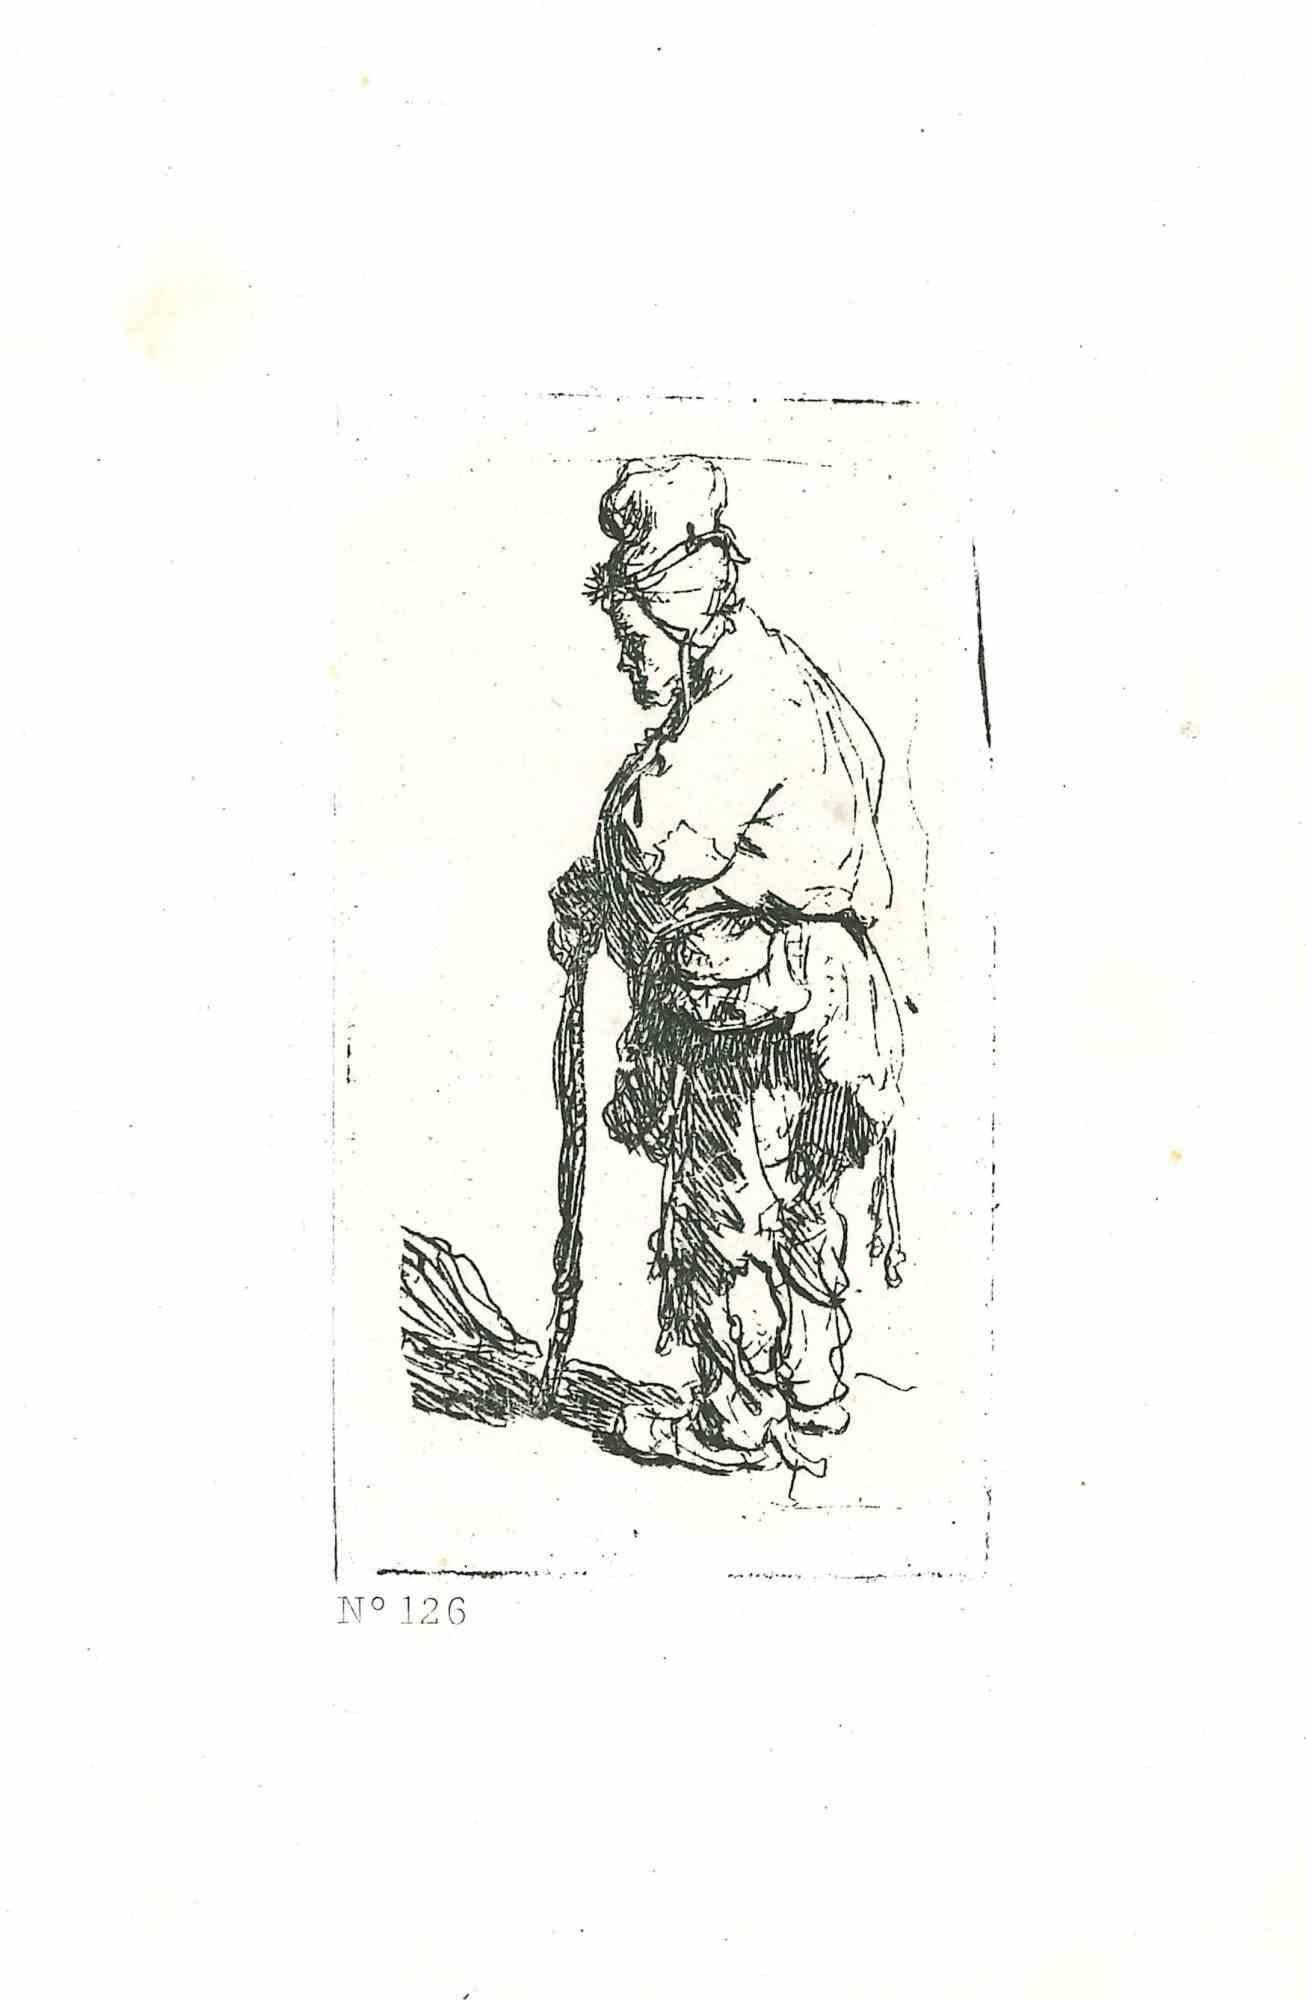 Charles Amand Durand Figurative Print - Beggar Leaning on a Stick - Engraving after Rembrandt - 19th Century